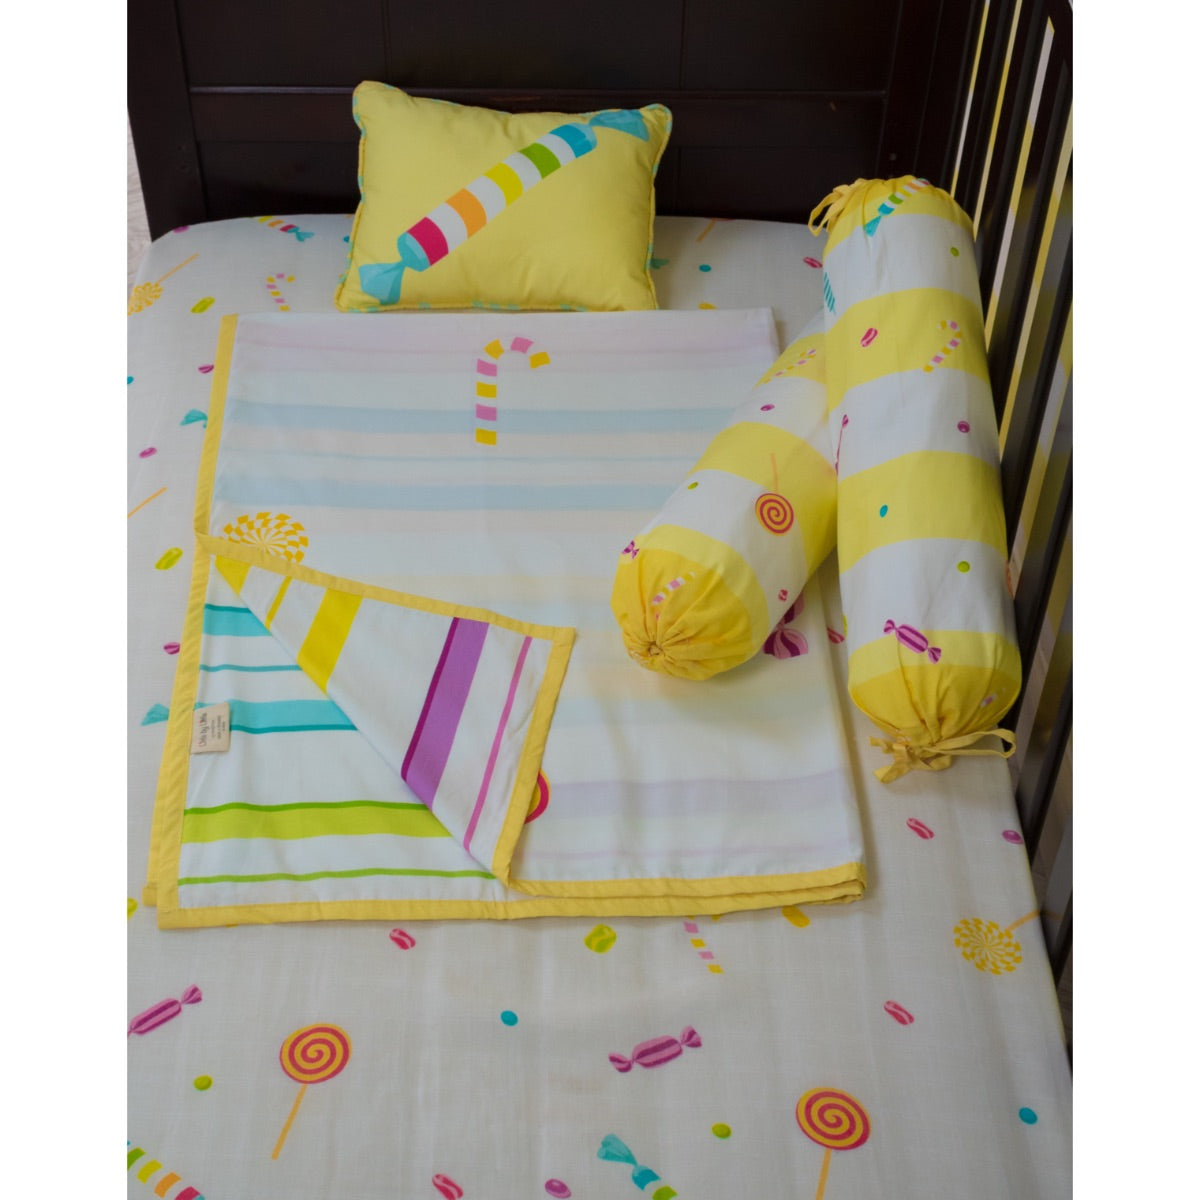 Little By Little Candy Land Cot Bedding Set with Dohar Blanket, White